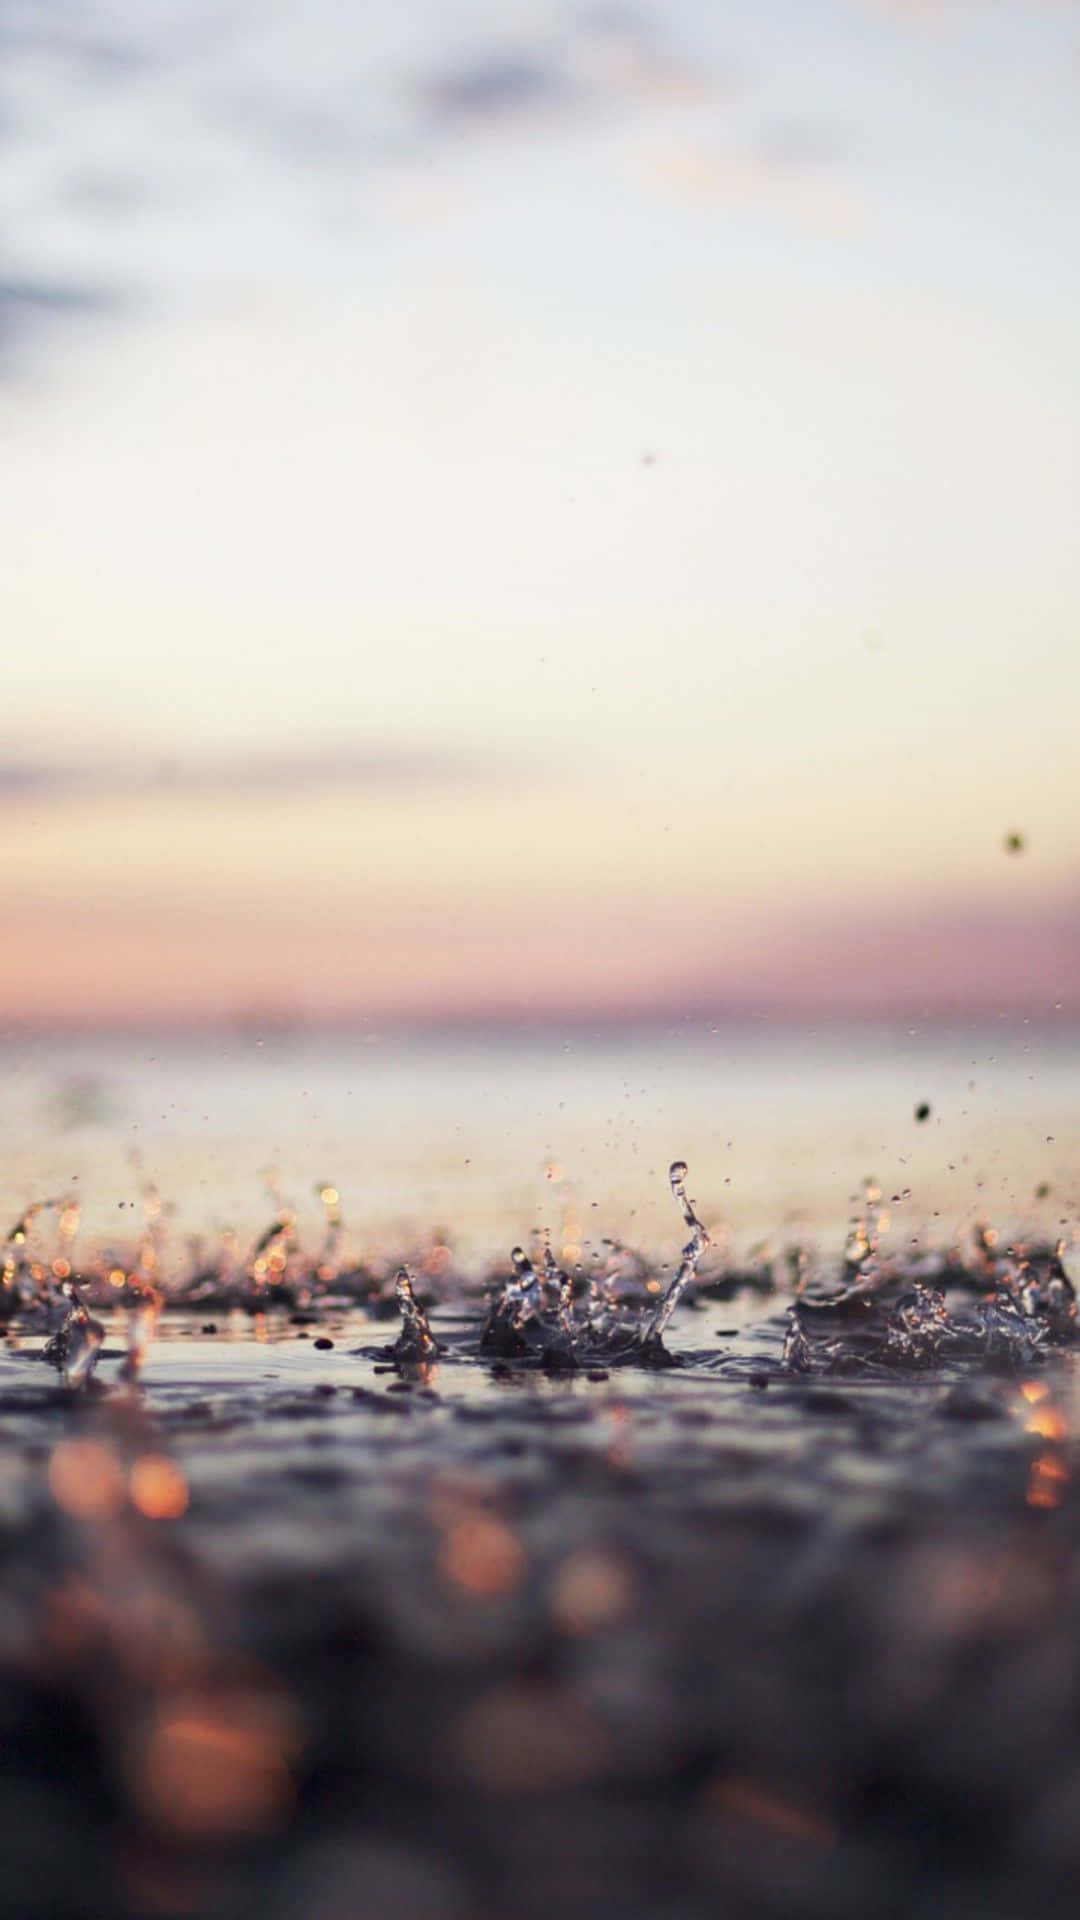 Water Splashes On The Beach At Sunset Wallpaper